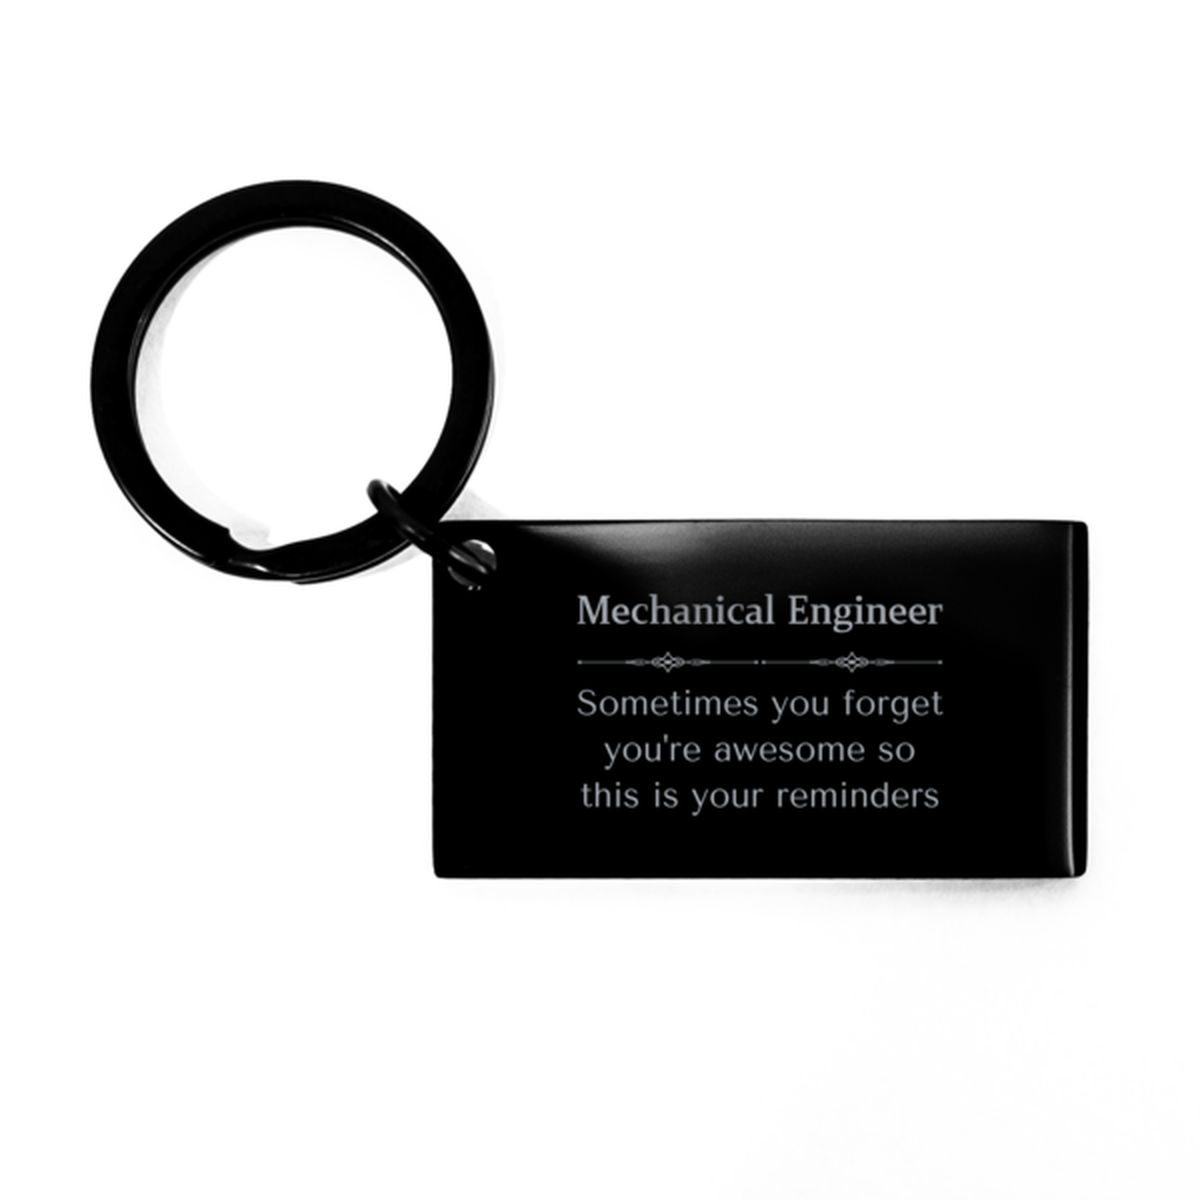 Sentimental Mechanical Engineer Keychain, Operations Manager Sometimes you forget you're awesome so this is your reminders, Graduation Christmas Birthday Gifts for Mechanical Engineer, Men, Women, Coworkers